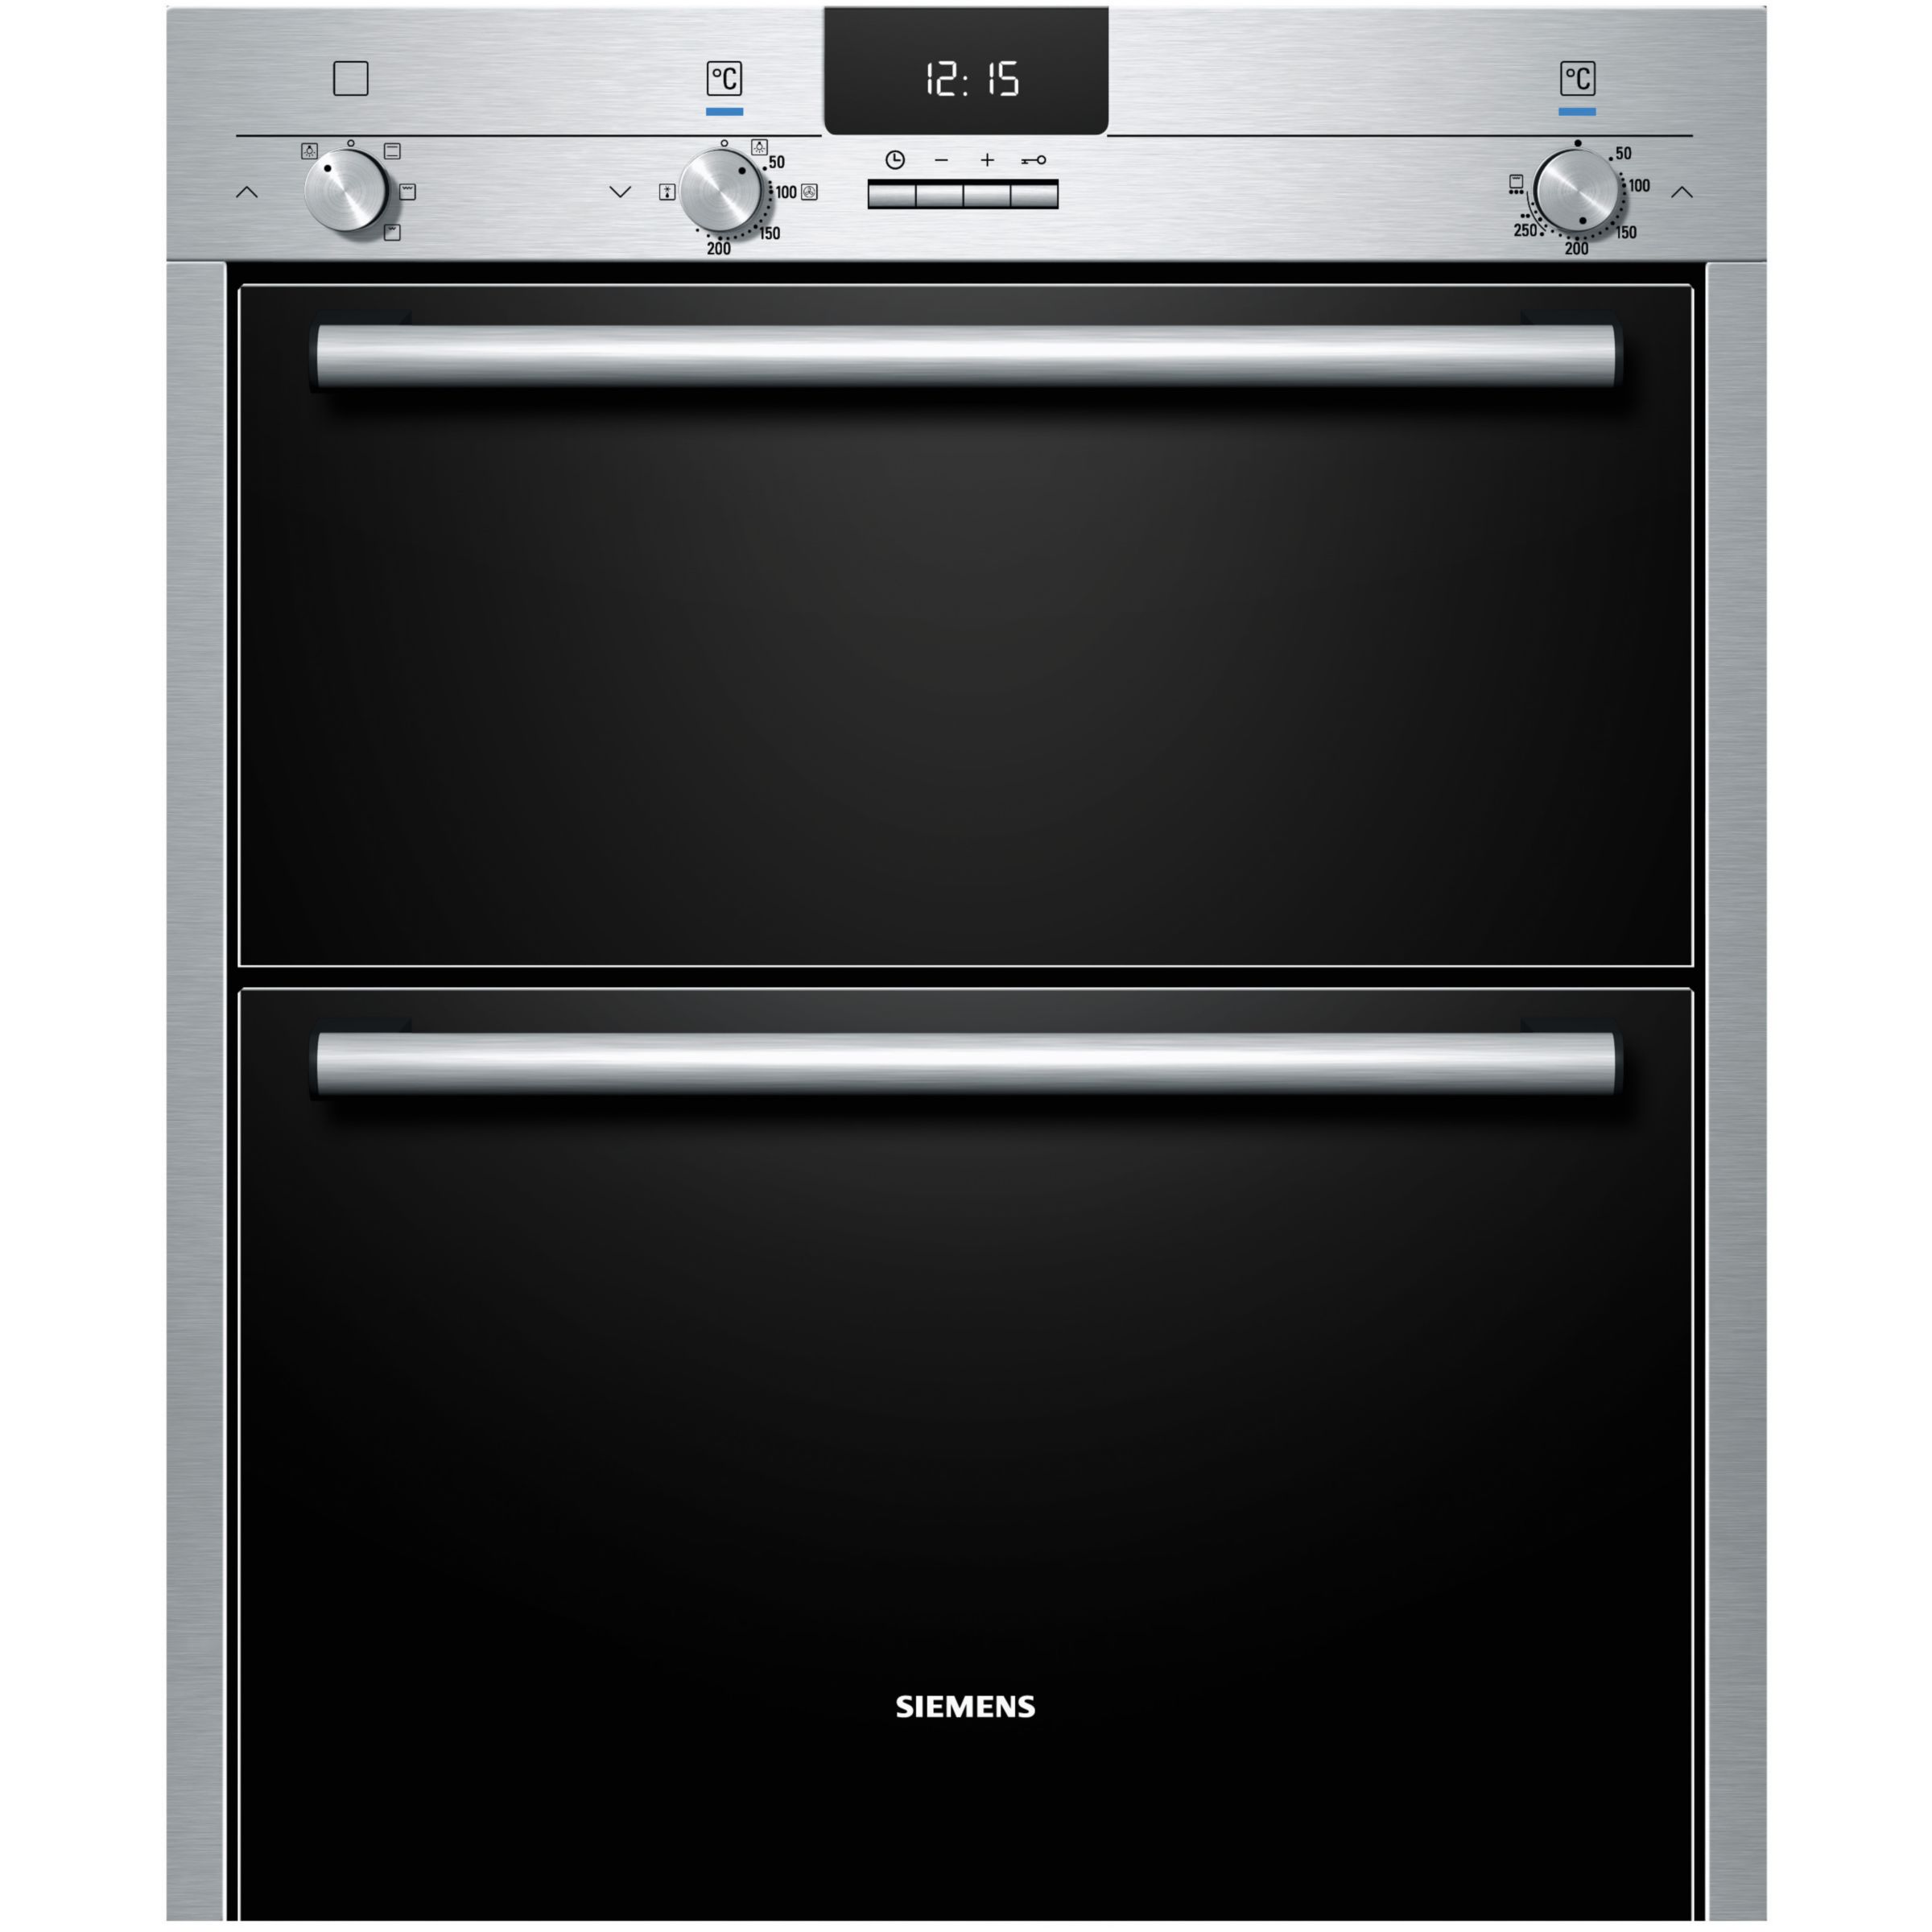 Siemens HB13NB521B Double Electric Oven, Stainless Steel at John Lewis